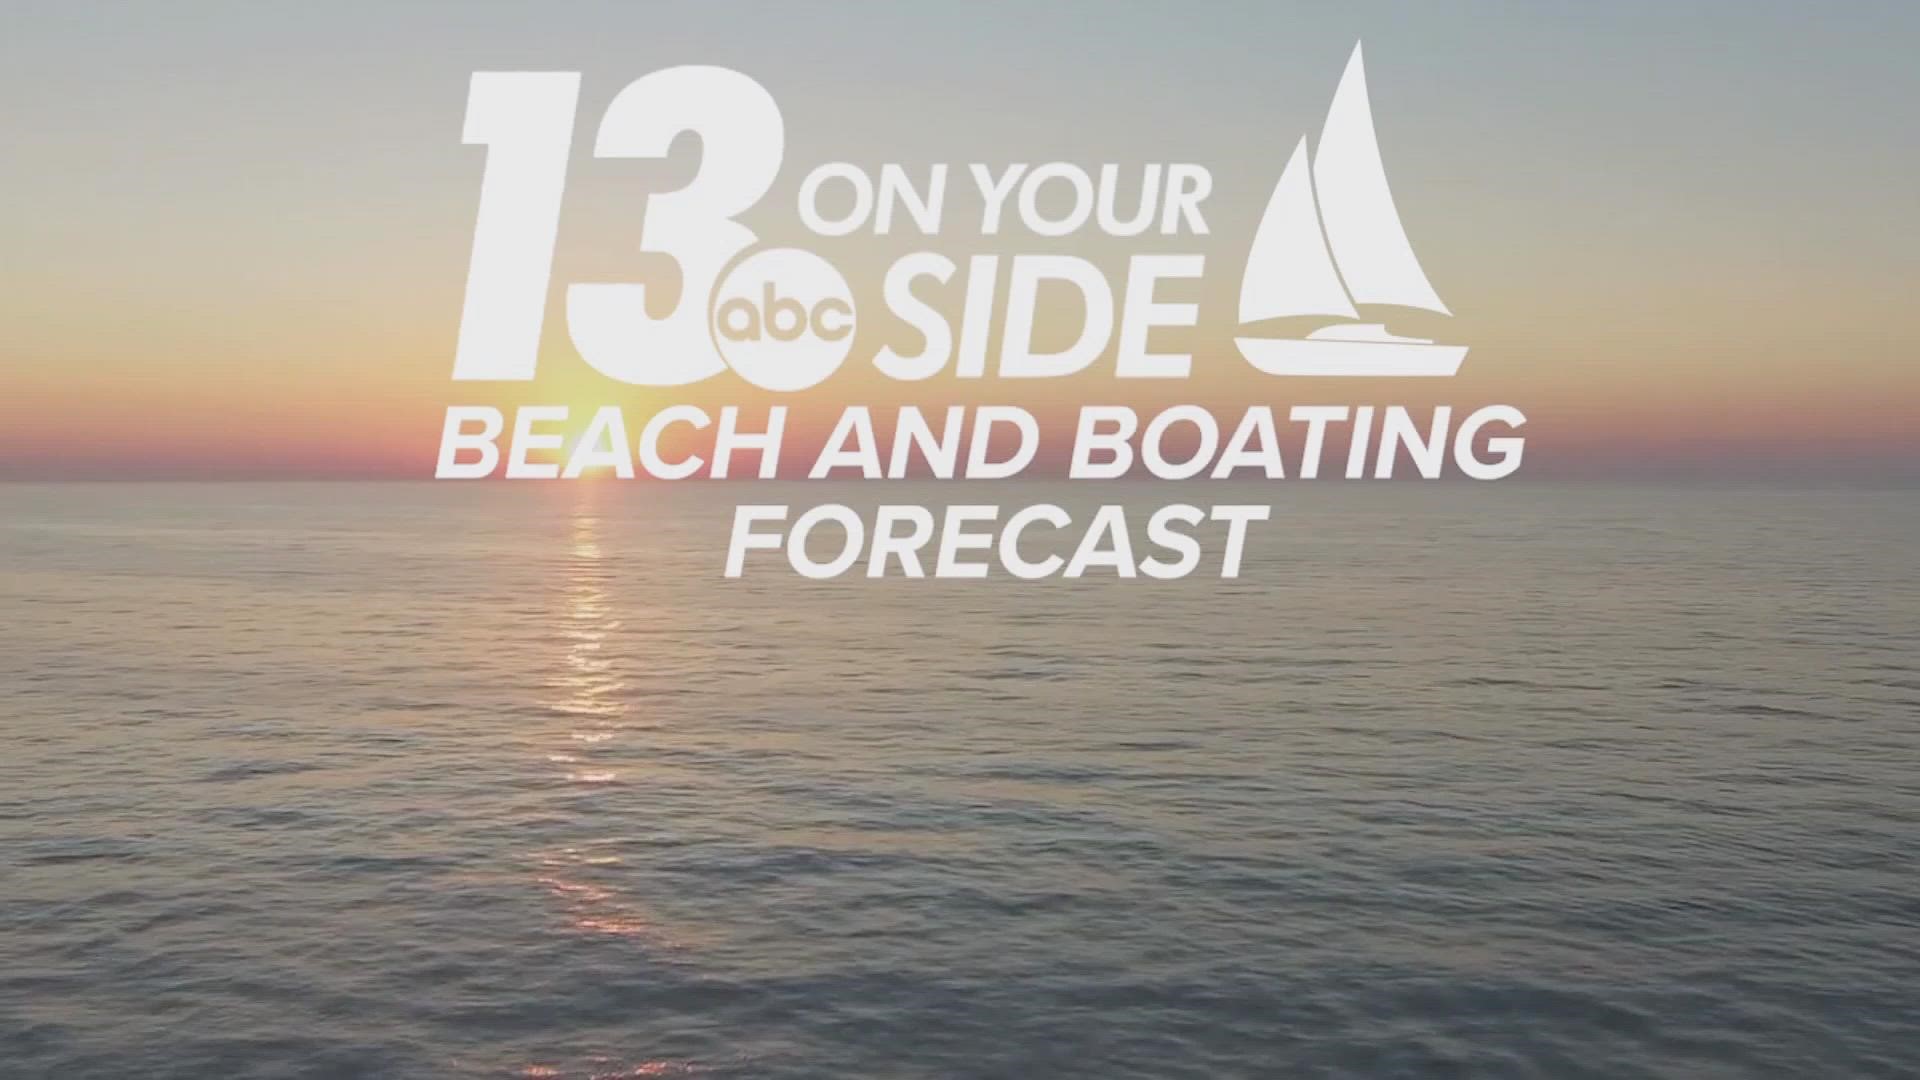 Check out the latest beach and boating forecast before heading out to Lake Michigan!